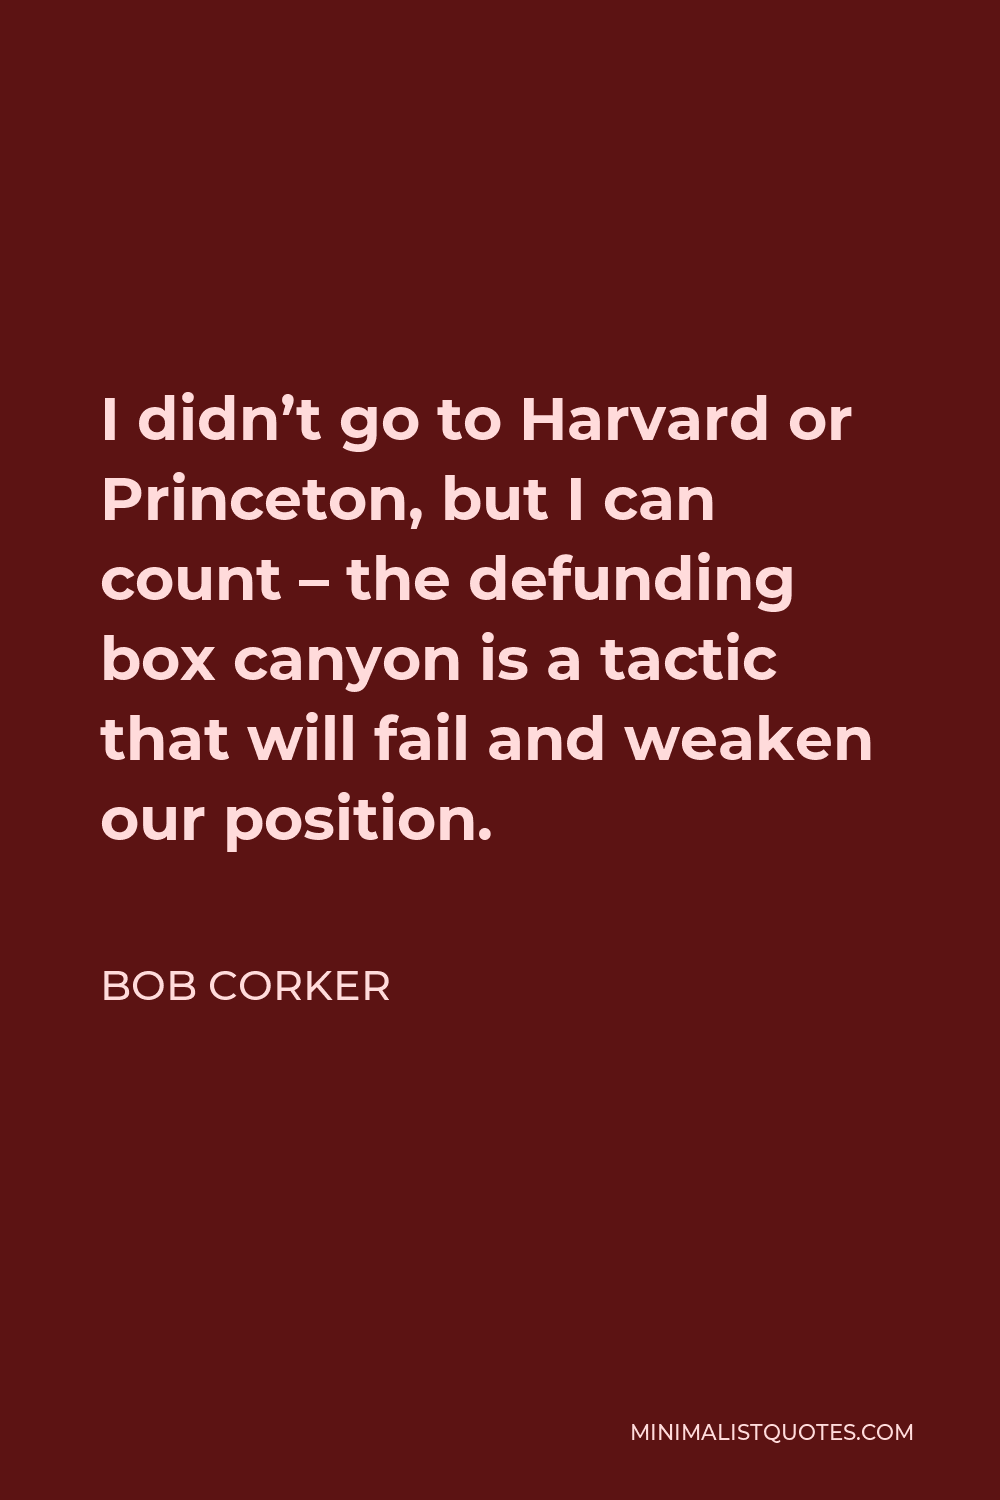 Bob Corker Quote - I didn’t go to Harvard or Princeton, but I can count – the defunding box canyon is a tactic that will fail and weaken our position.